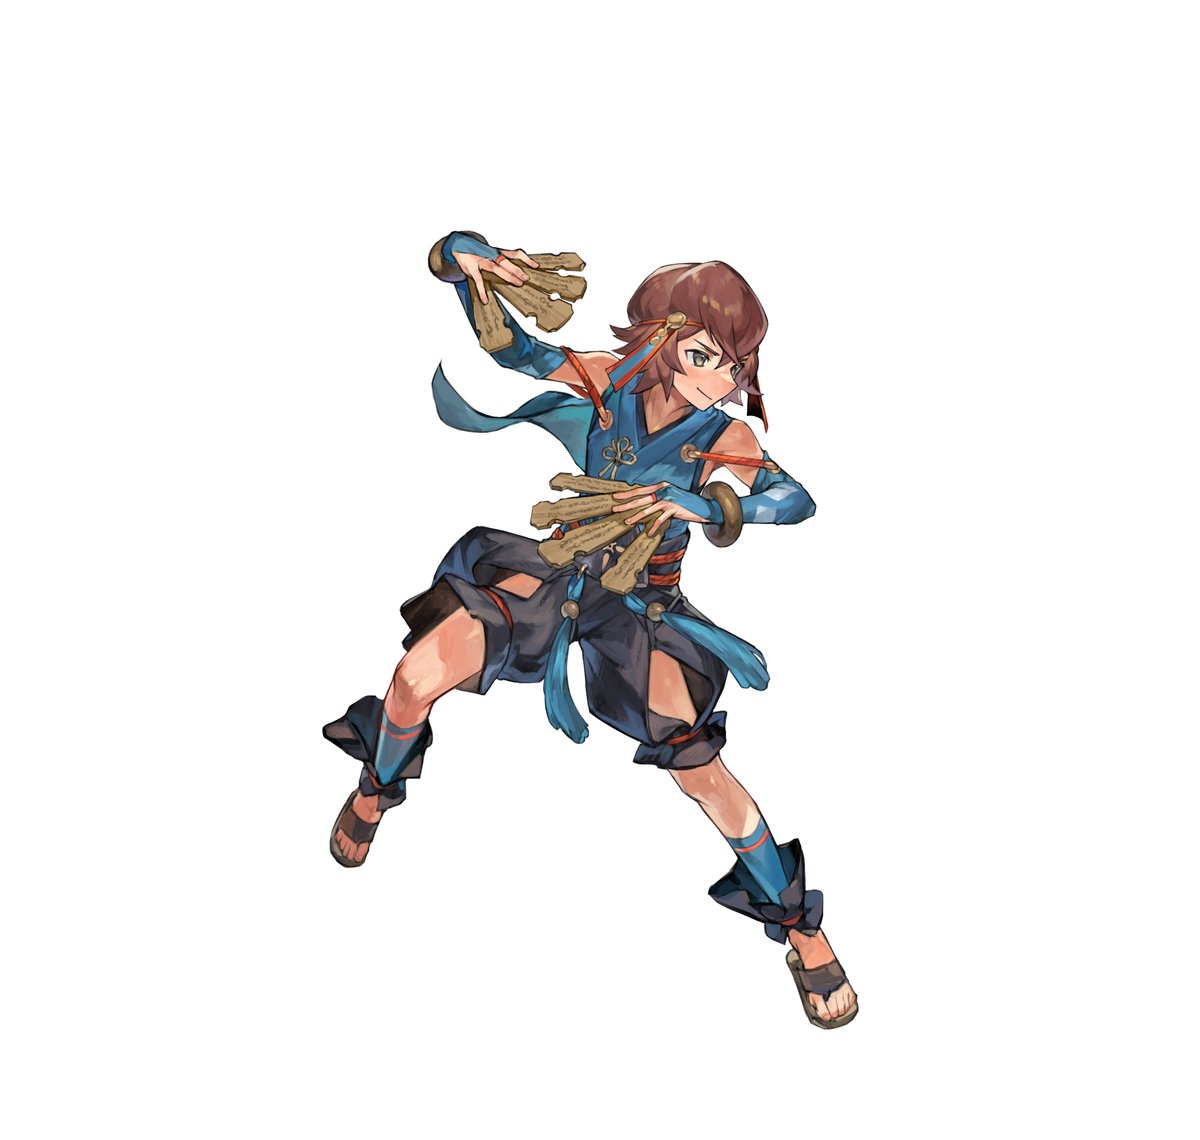 Meet Hayato: Diviner of Reppu from the #FireEmblem Fates games. From the Wind Tribe, who live within Hoshido. Despite his age, he has a rare talent for magical techniques. #FEHeroes guide.fire-emblem-heroes.com/en-US/11004004…